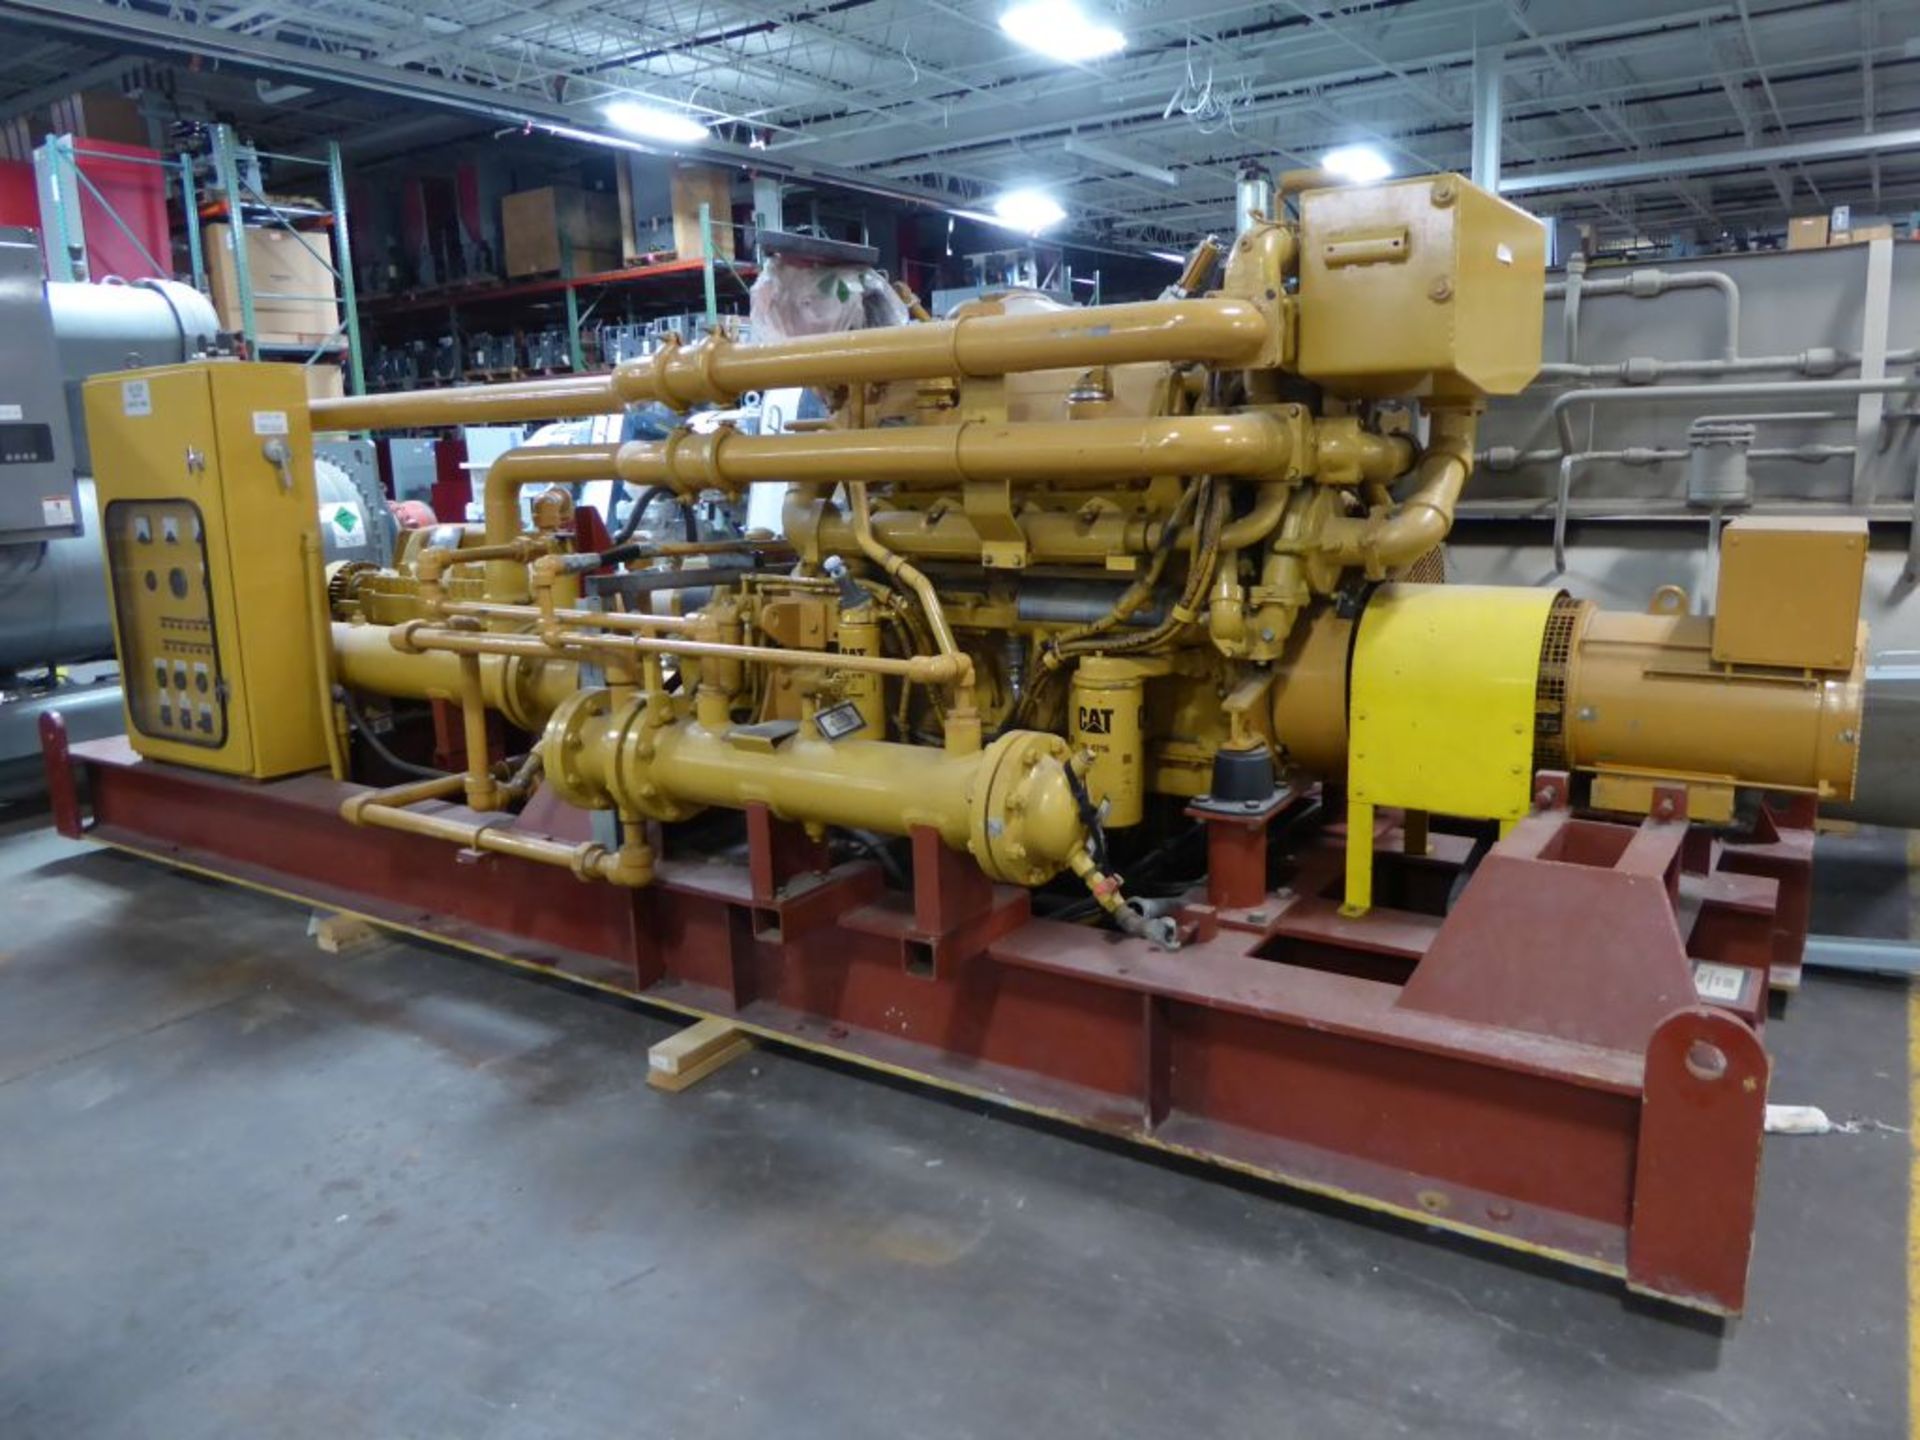 Located in Fridley, MN - Caterpillar Diesel Powered Pump - Image 2 of 23